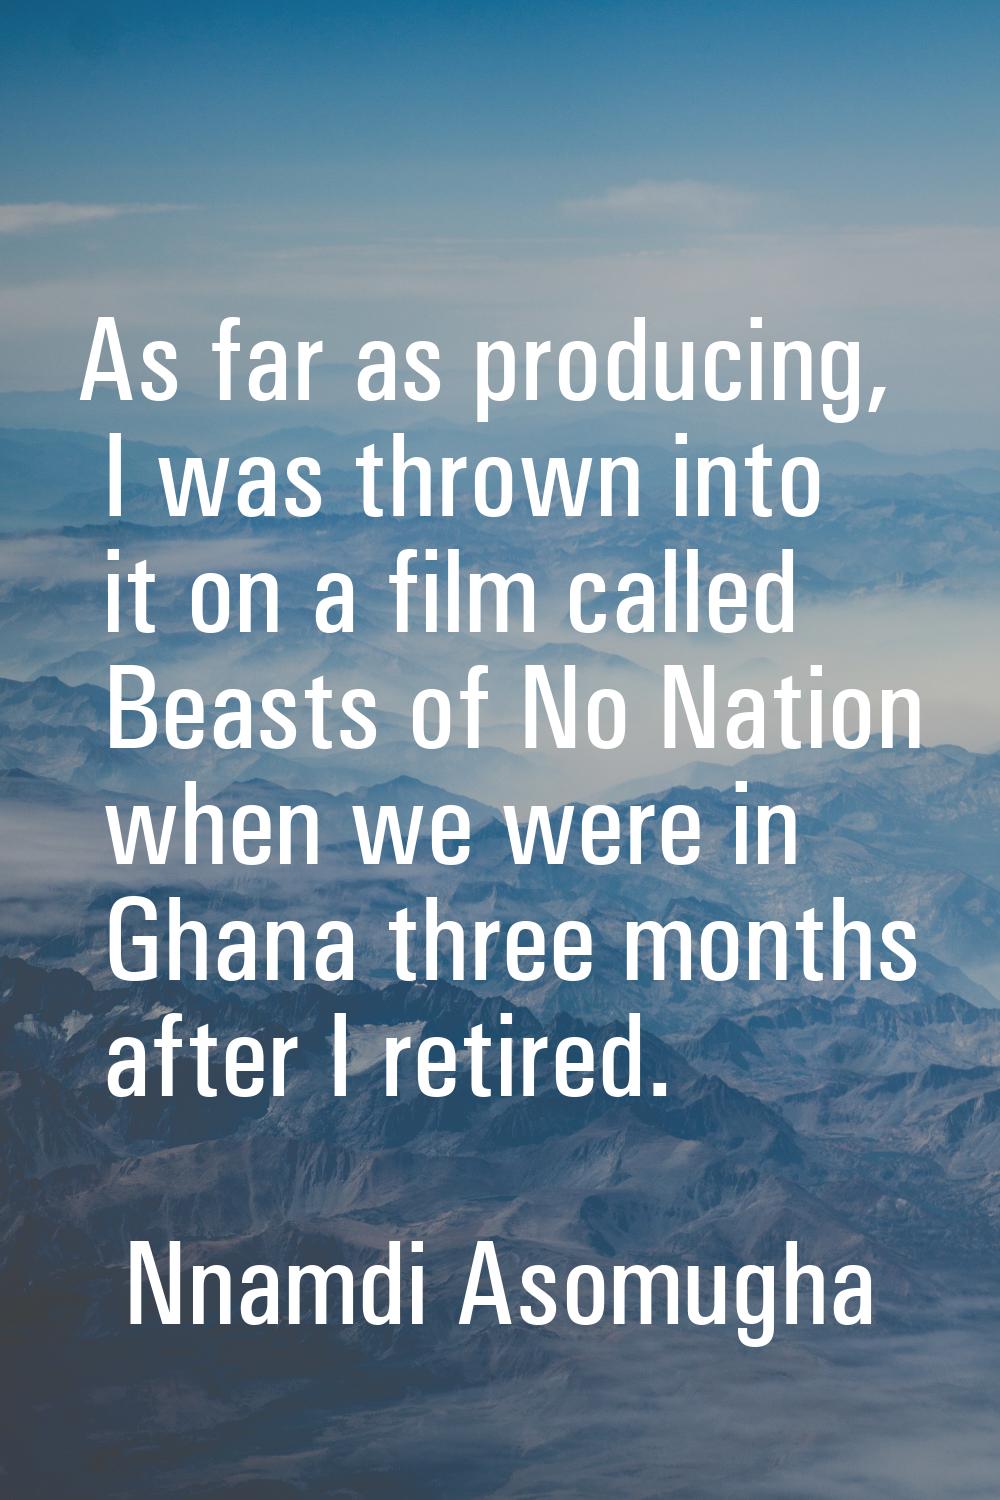 As far as producing, I was thrown into it on a film called Beasts of No Nation when we were in Ghan